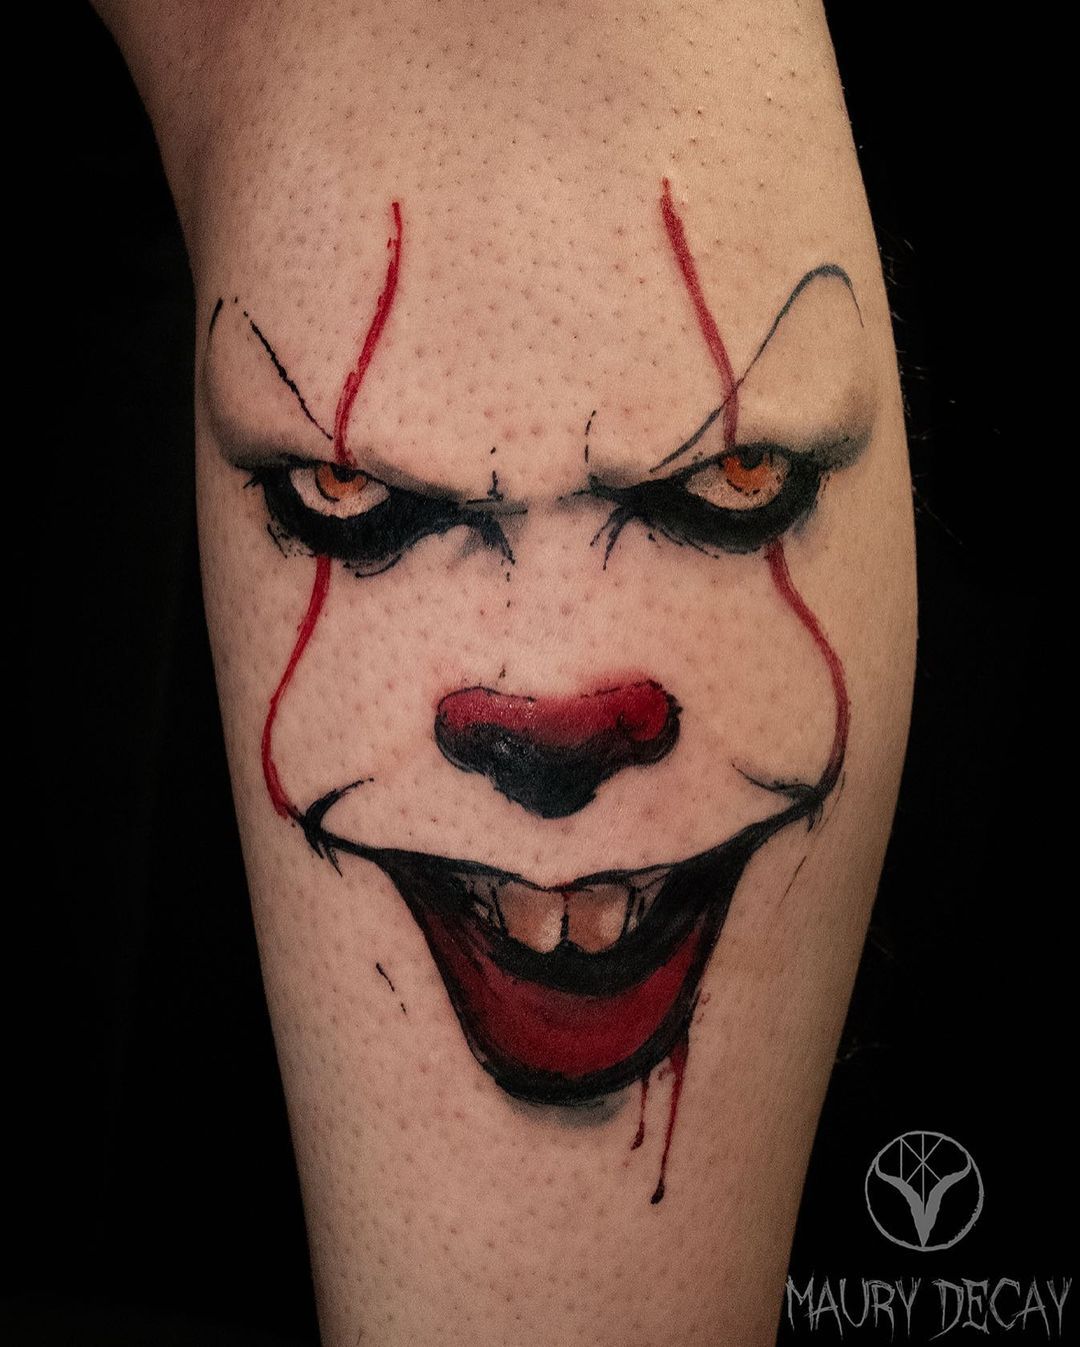 Pennywise tattoo by billyweigler at folkloretradingco in Dallas TX  billyweigler folkloretradingco dallas texas pennywise  Instagram